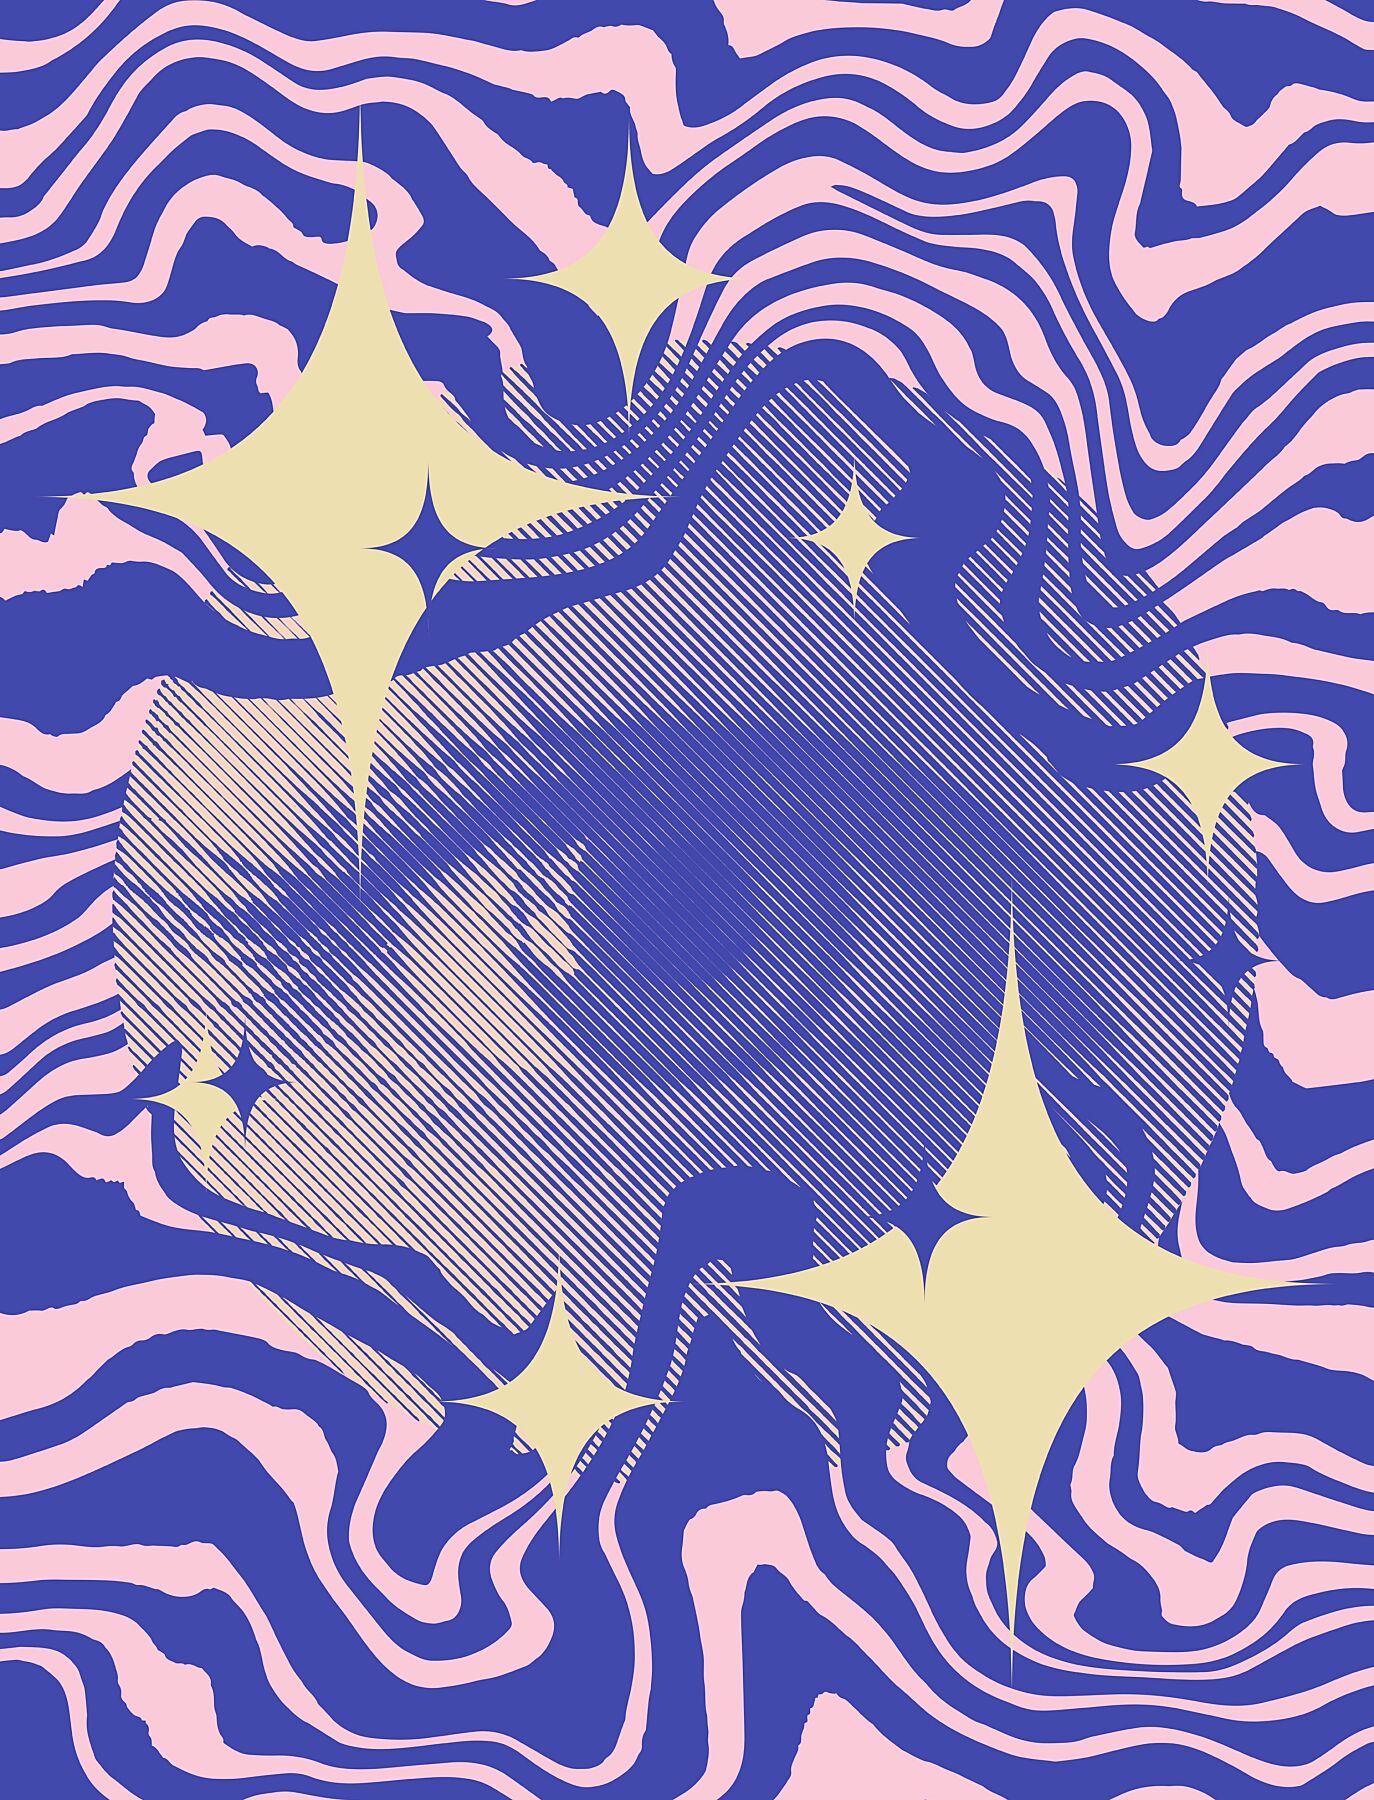  giclée print titled 'Eye' from Genuine Studio, featuring a detailed eye surrounded by vibrant blue and pink waves and ethereal stars. Part of the BLOC collection, printed on Ilford cotton textured paper, A2 size.